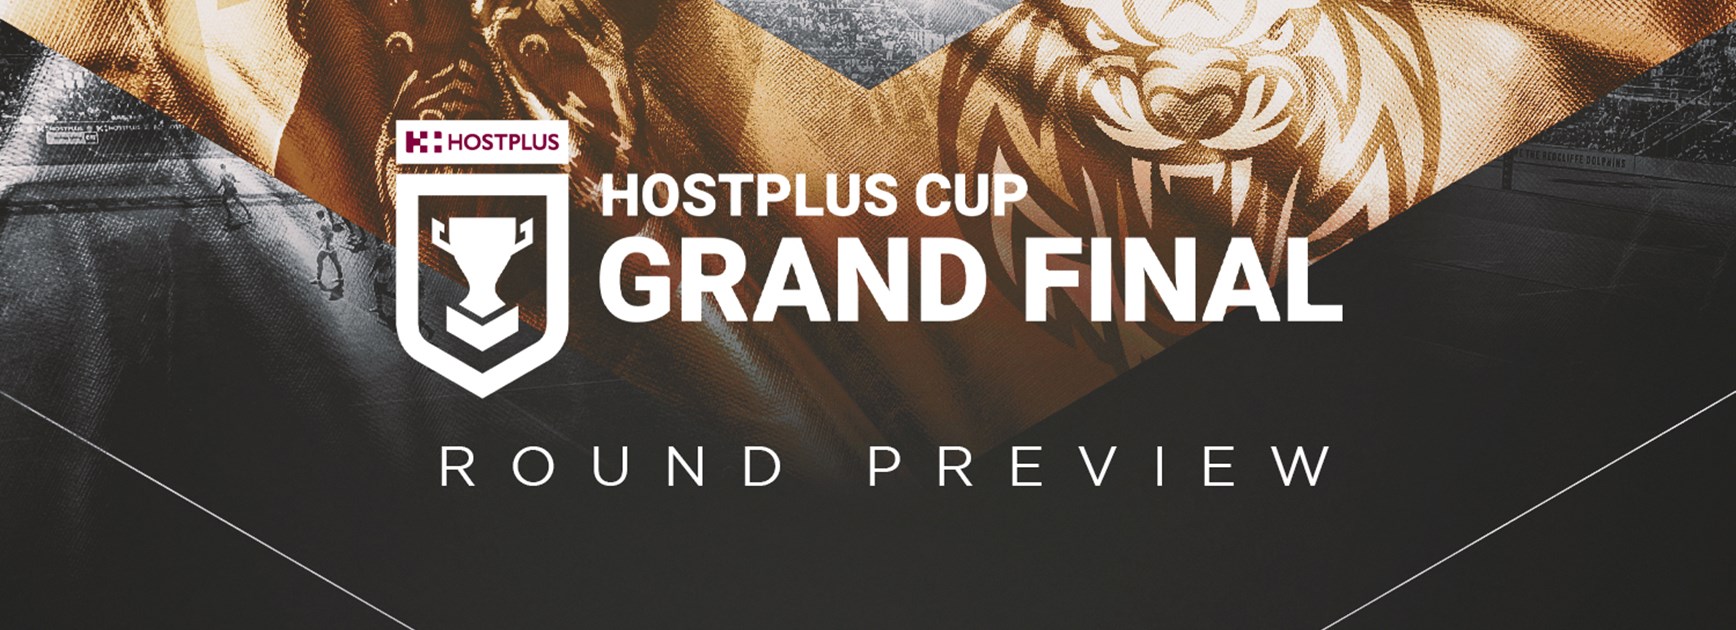 Hostplus Cup grand final preview